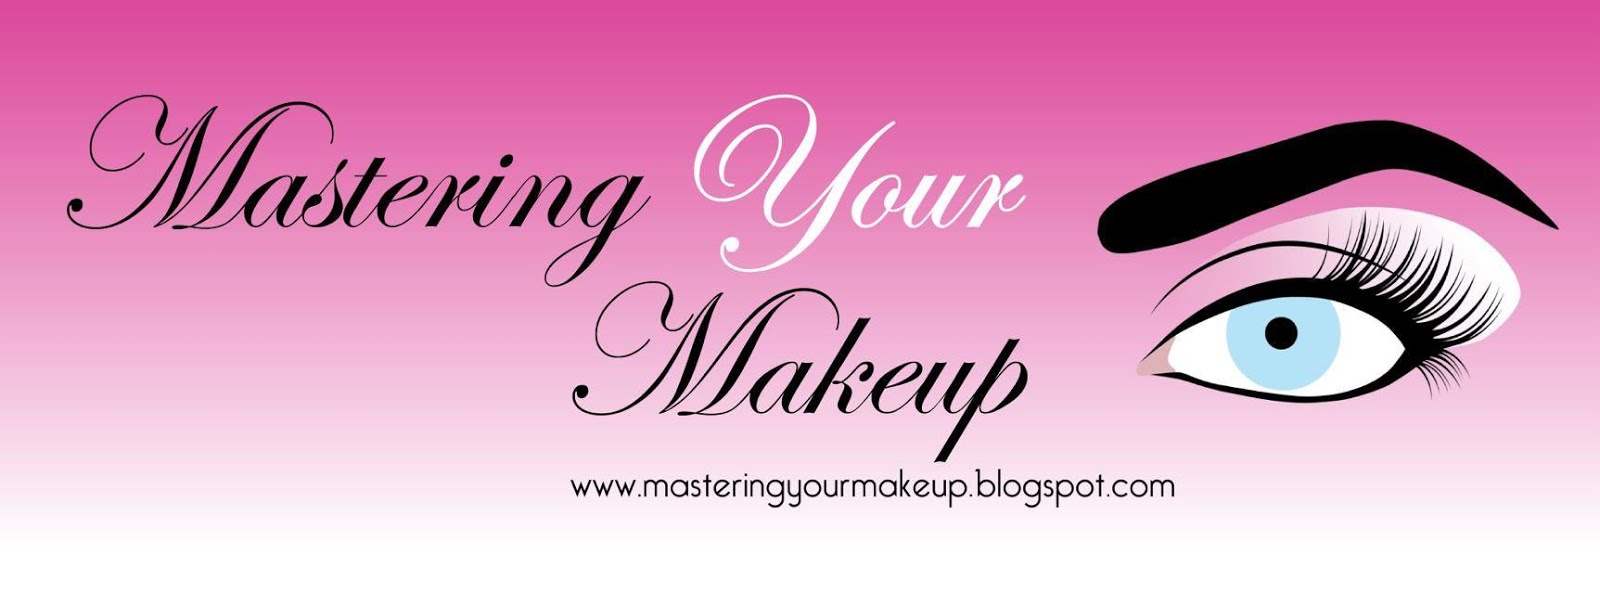 Mastering Your Makeup